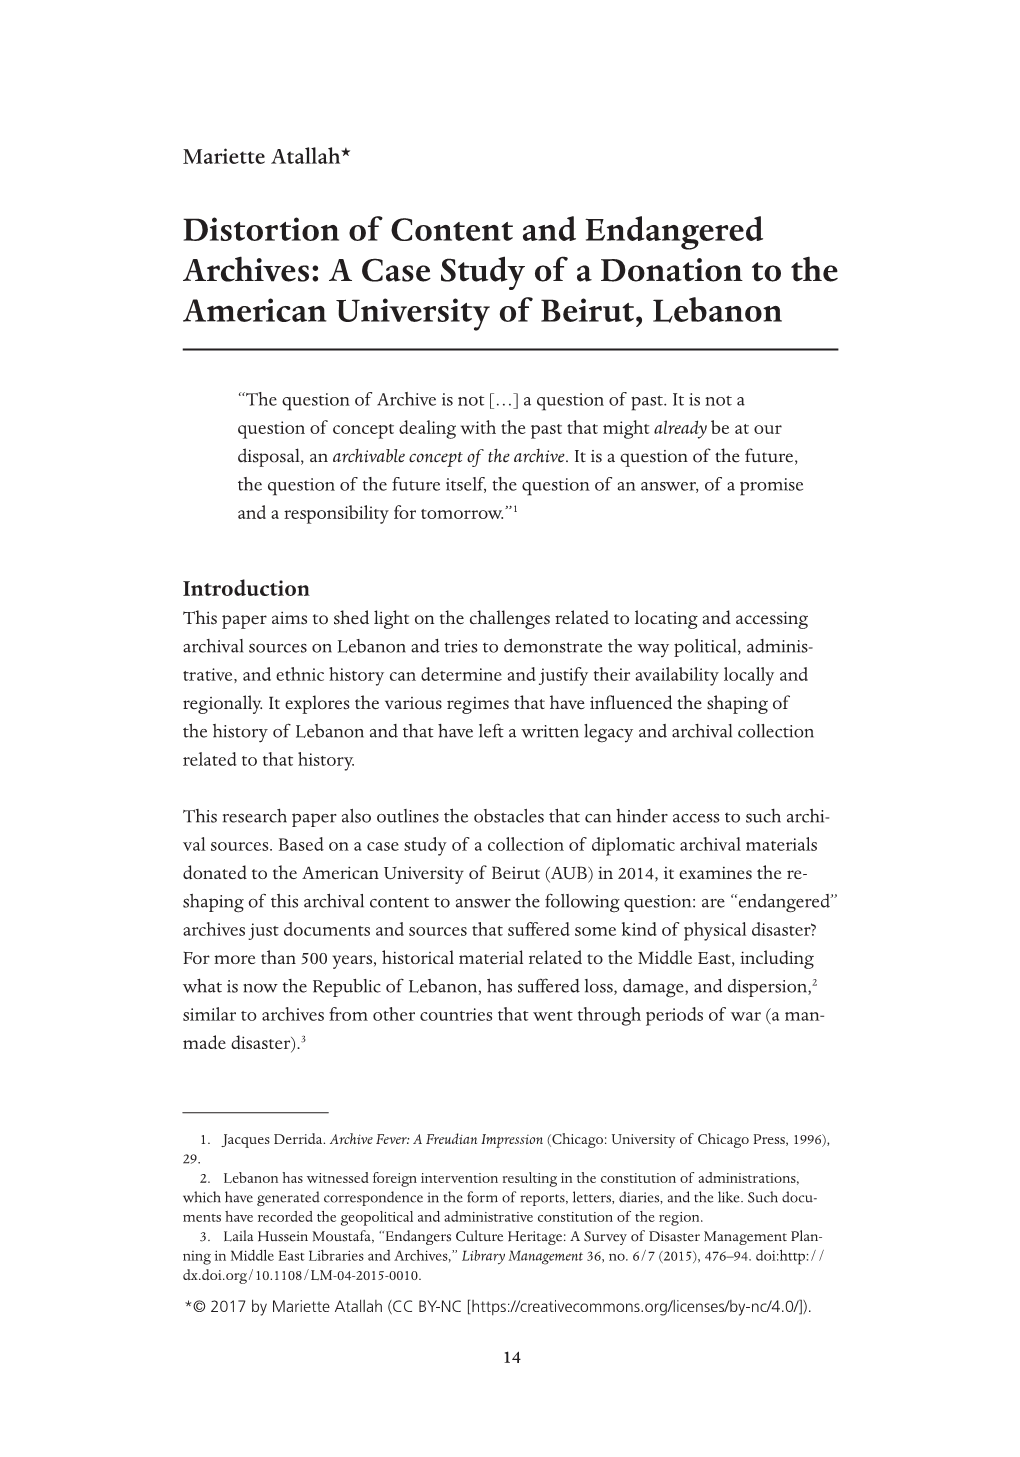 Distortion of Content and Endangered Archives: a Case Study of a Donation to the American University of Beirut, Lebanon